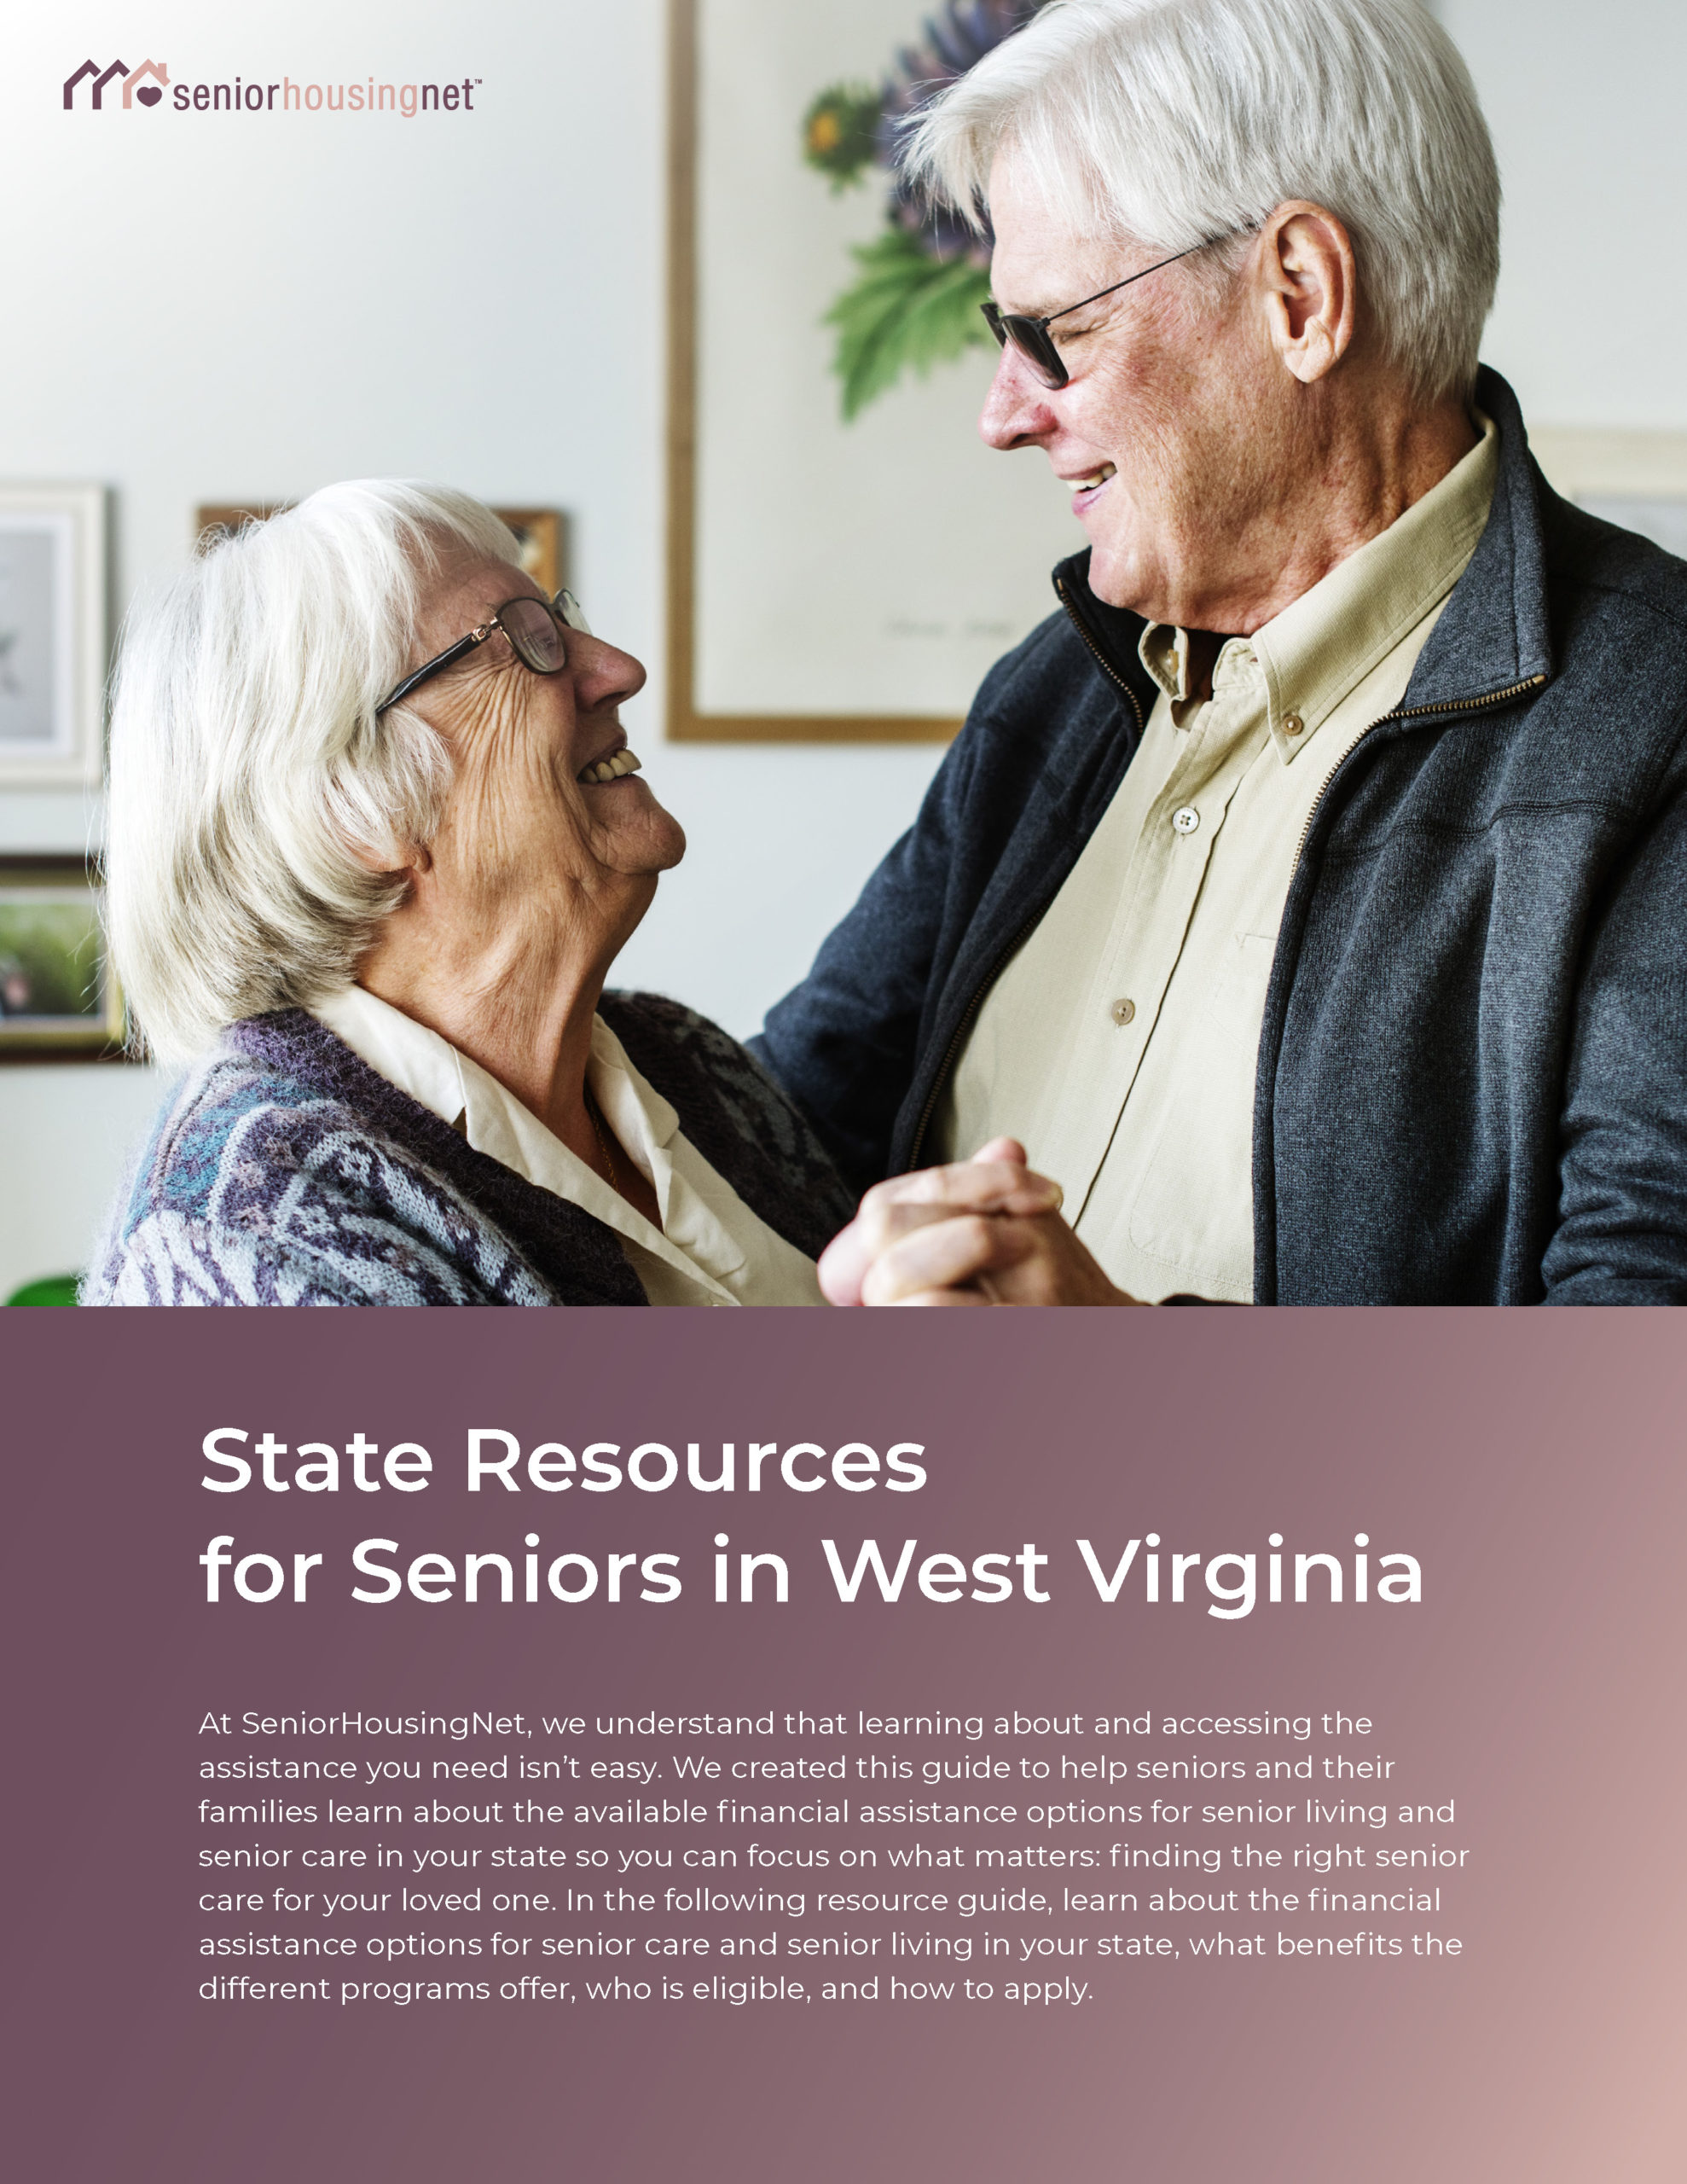 State Resources for Seniors in West Virginia